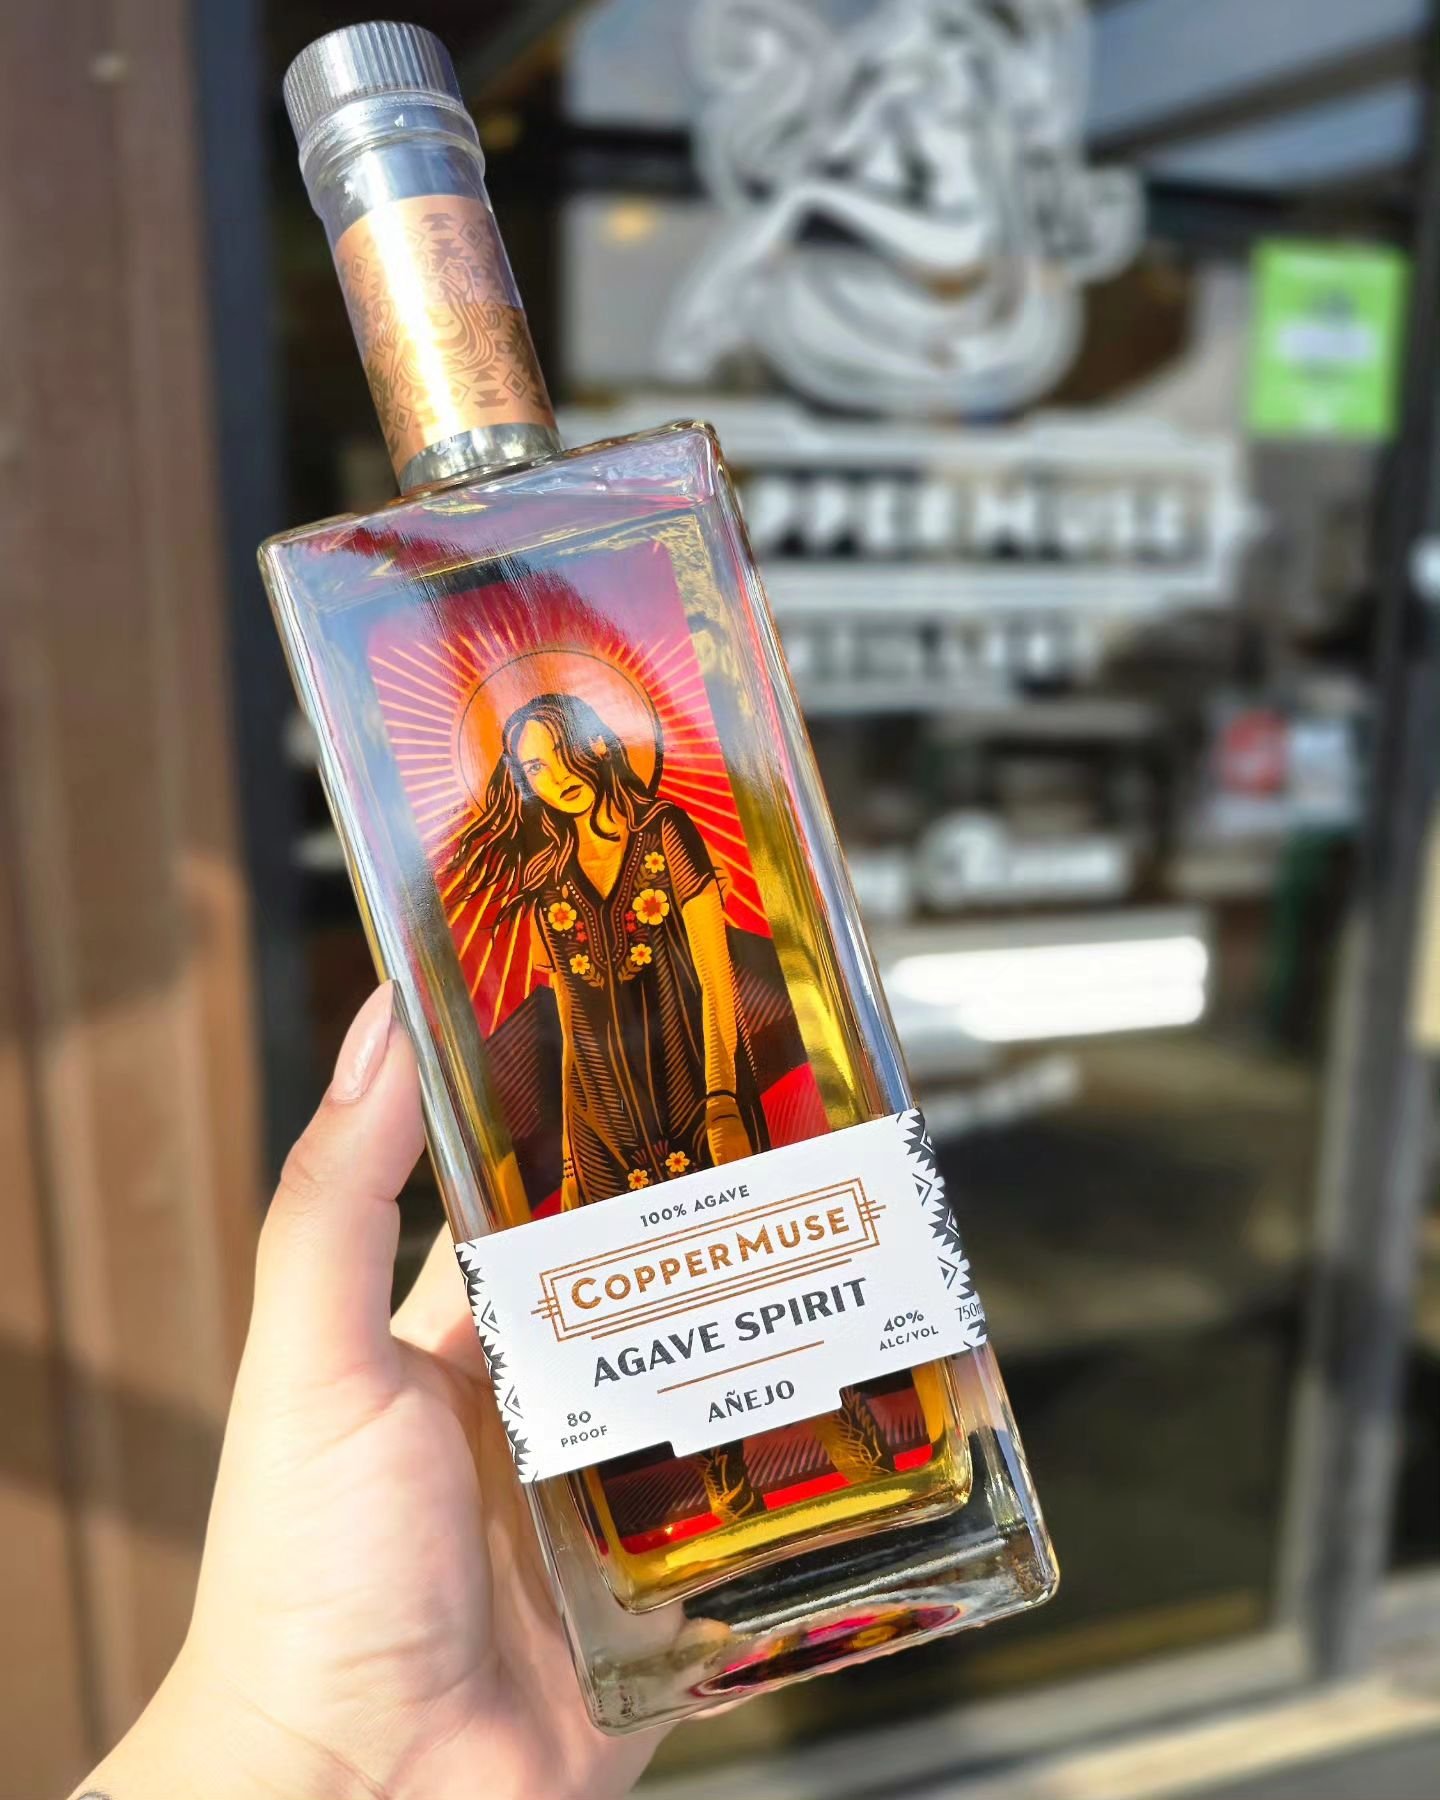 💥Happy Cinco de Mayo!💥

Did you know we make agave spirits?

We use 100% blue agave nectar from Mexico and Rocky Mountain spring water. Our Agave Spirt Anejo has been aged in Bourbon barrels for over a year!